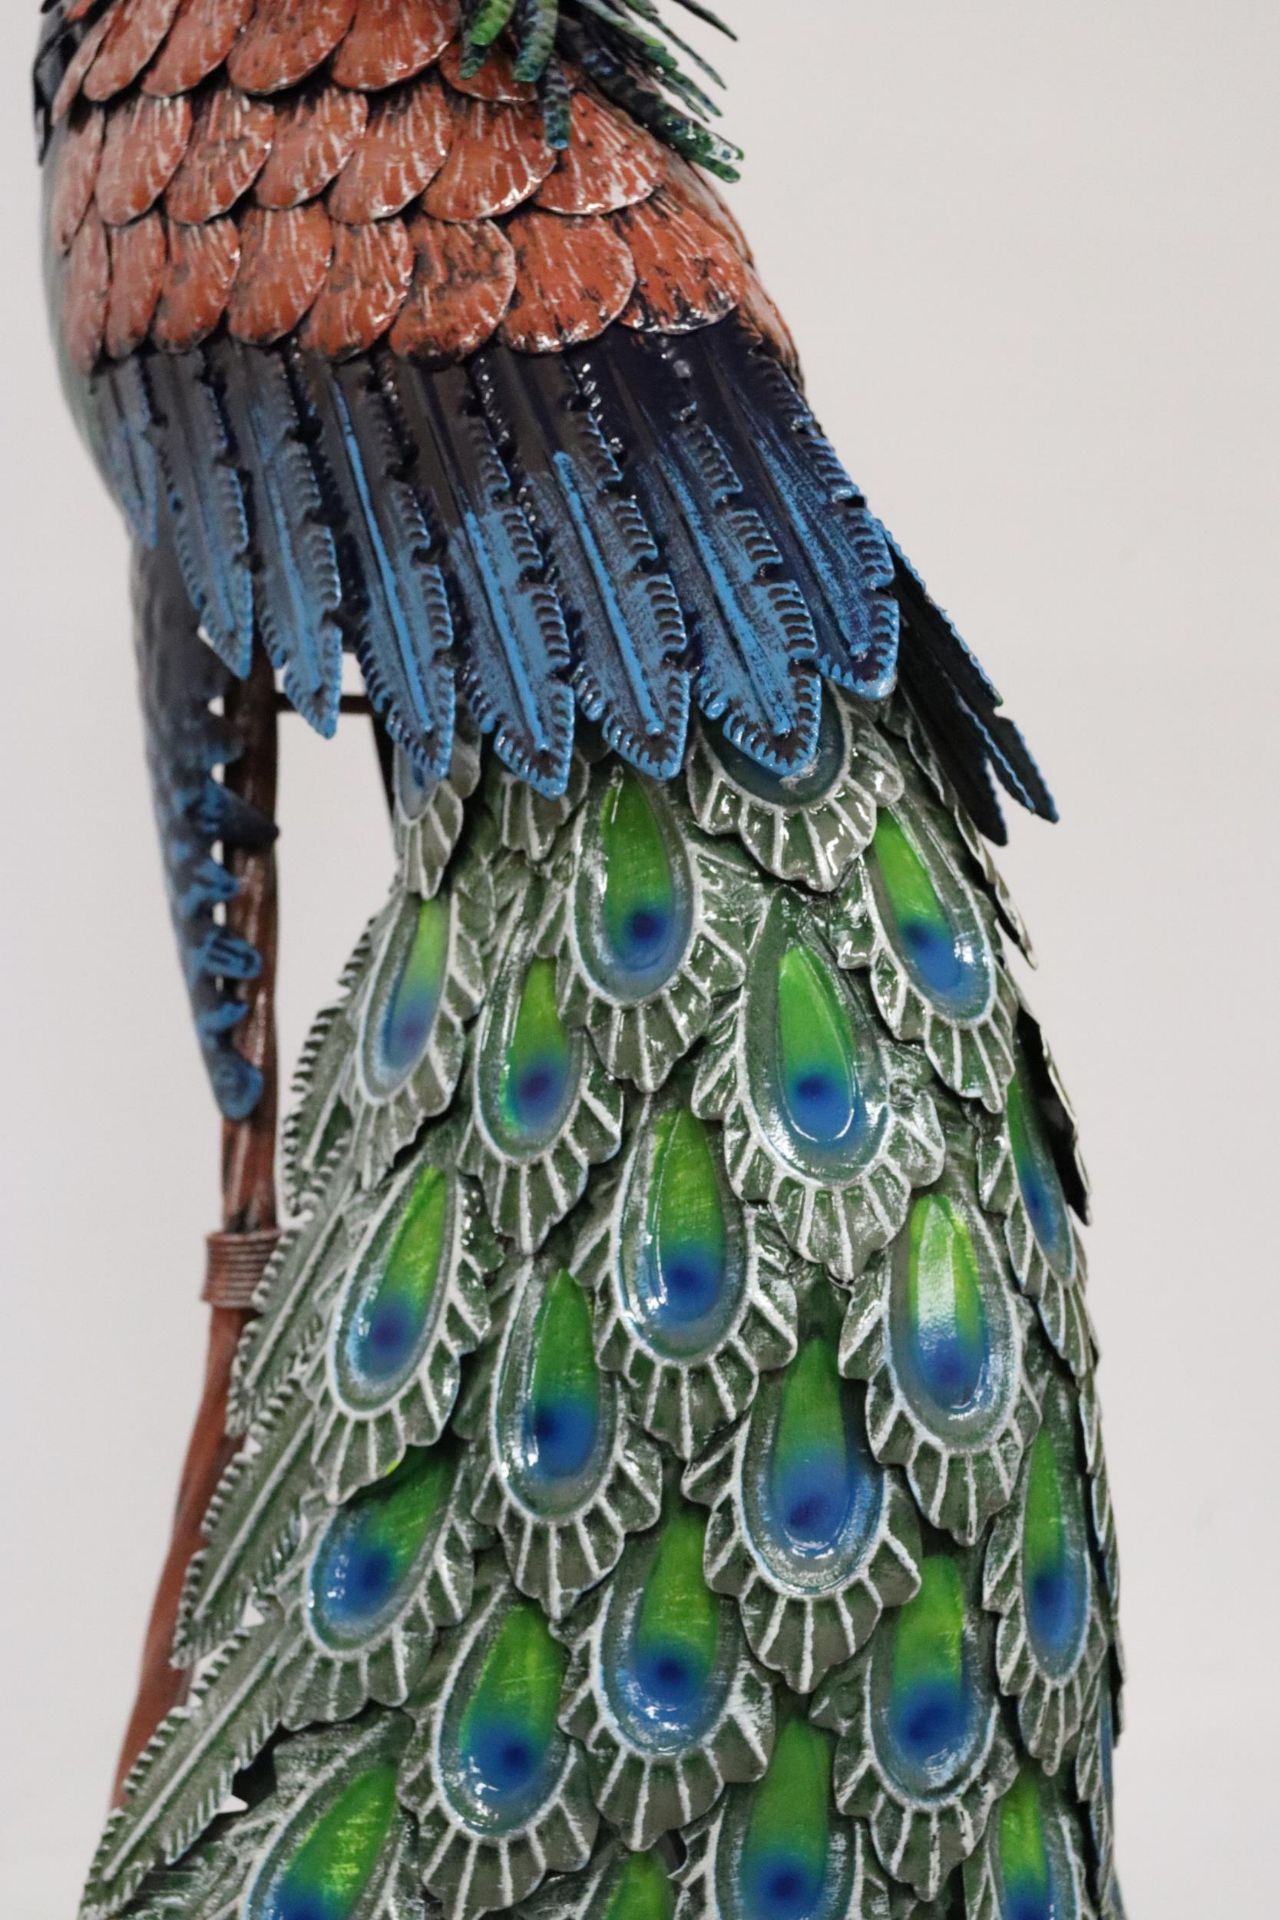 A HEAVY METAL PAINTED PEACOCK GARDEN ORNAMENT, 1 METRE HIGH - Image 6 of 8